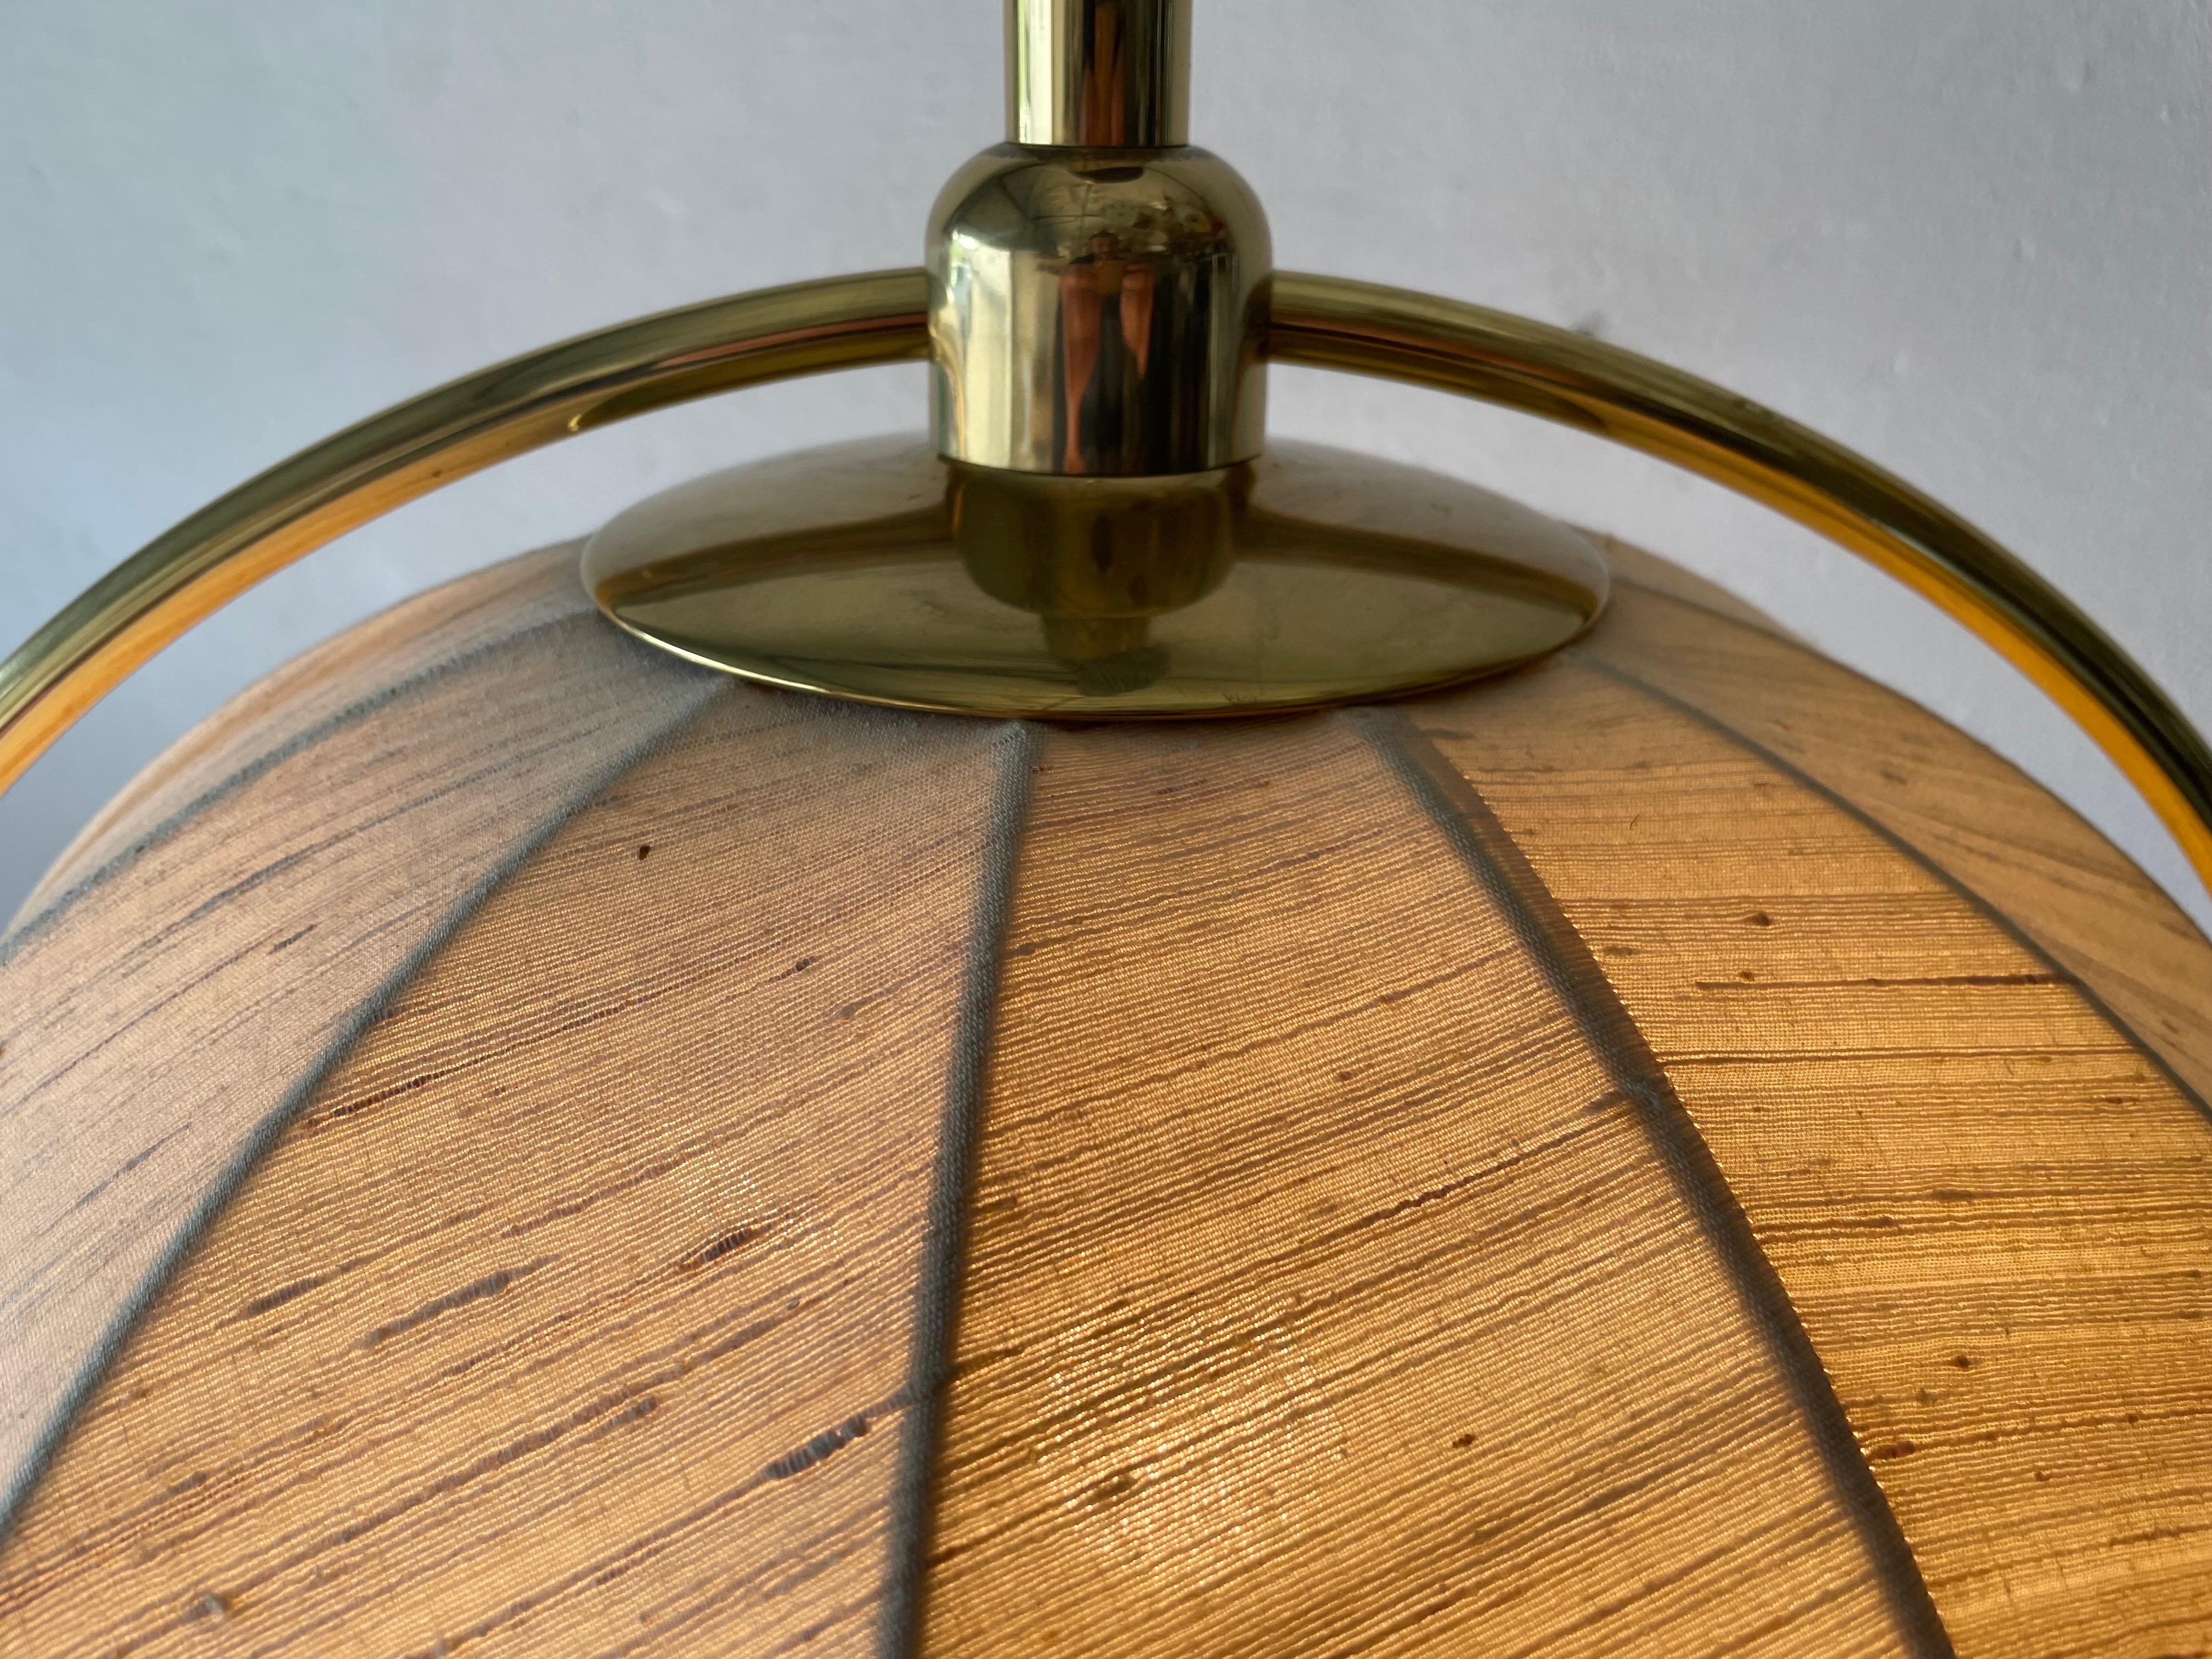 Rare Brass & Fabric Shade Pendant Lamp by WKR, 1970s, Germany 4